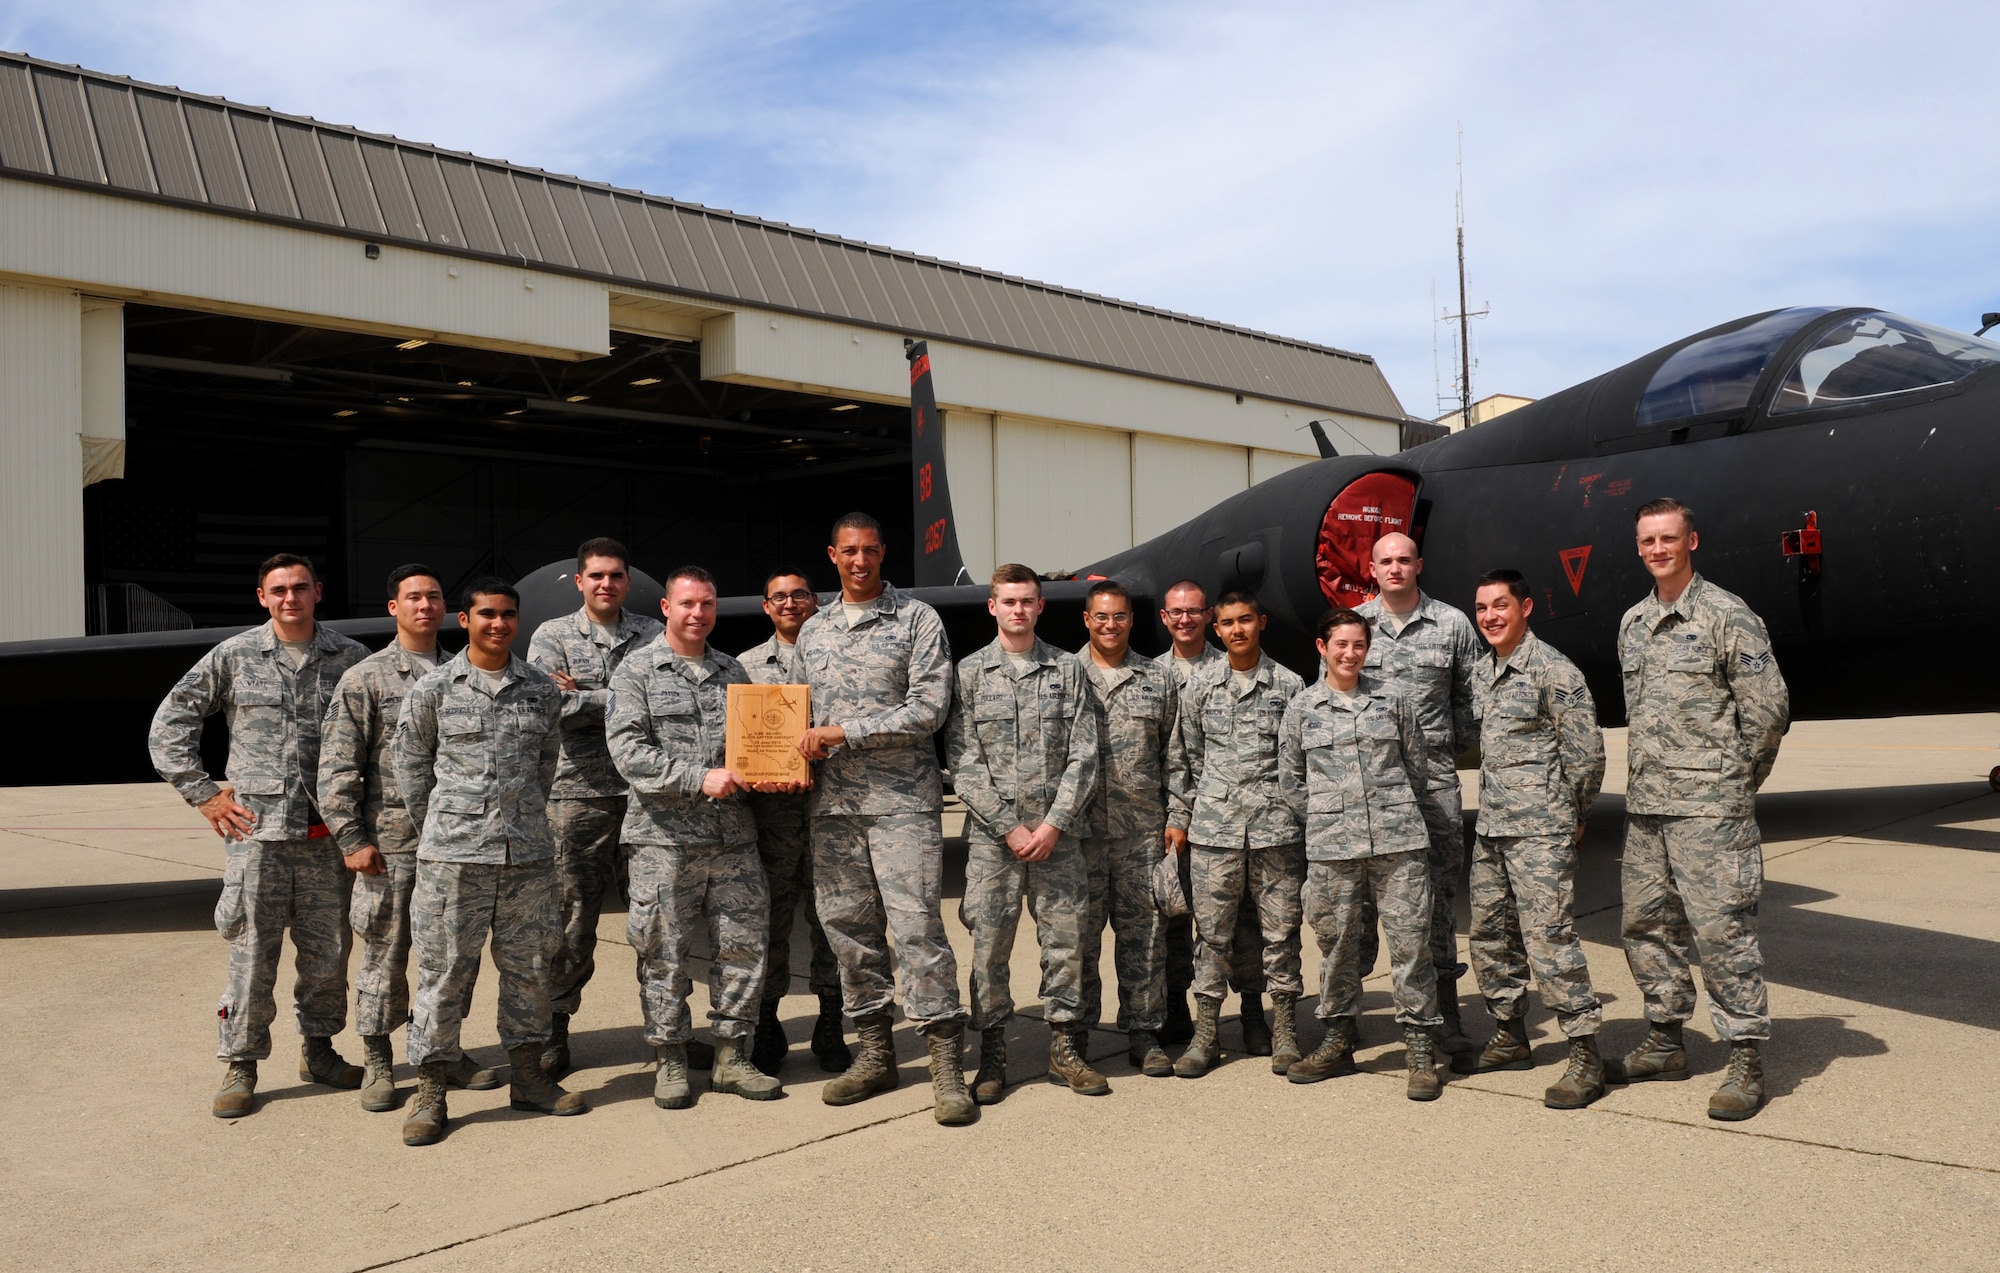 Airmen from the 9th Aircraft Maintenance Squadron pose with a U-2 Dragon Lady at Beale Air Force Base, California, July 14, 2015. The Airmen were recognized for a “black-letter jet,” a rare accomplishment in which a plane is flown with zero discrepancies. The achievement has not happened in 13 years at Beale. (U.S. Air Force photo by Airman Preston L. Cherry)